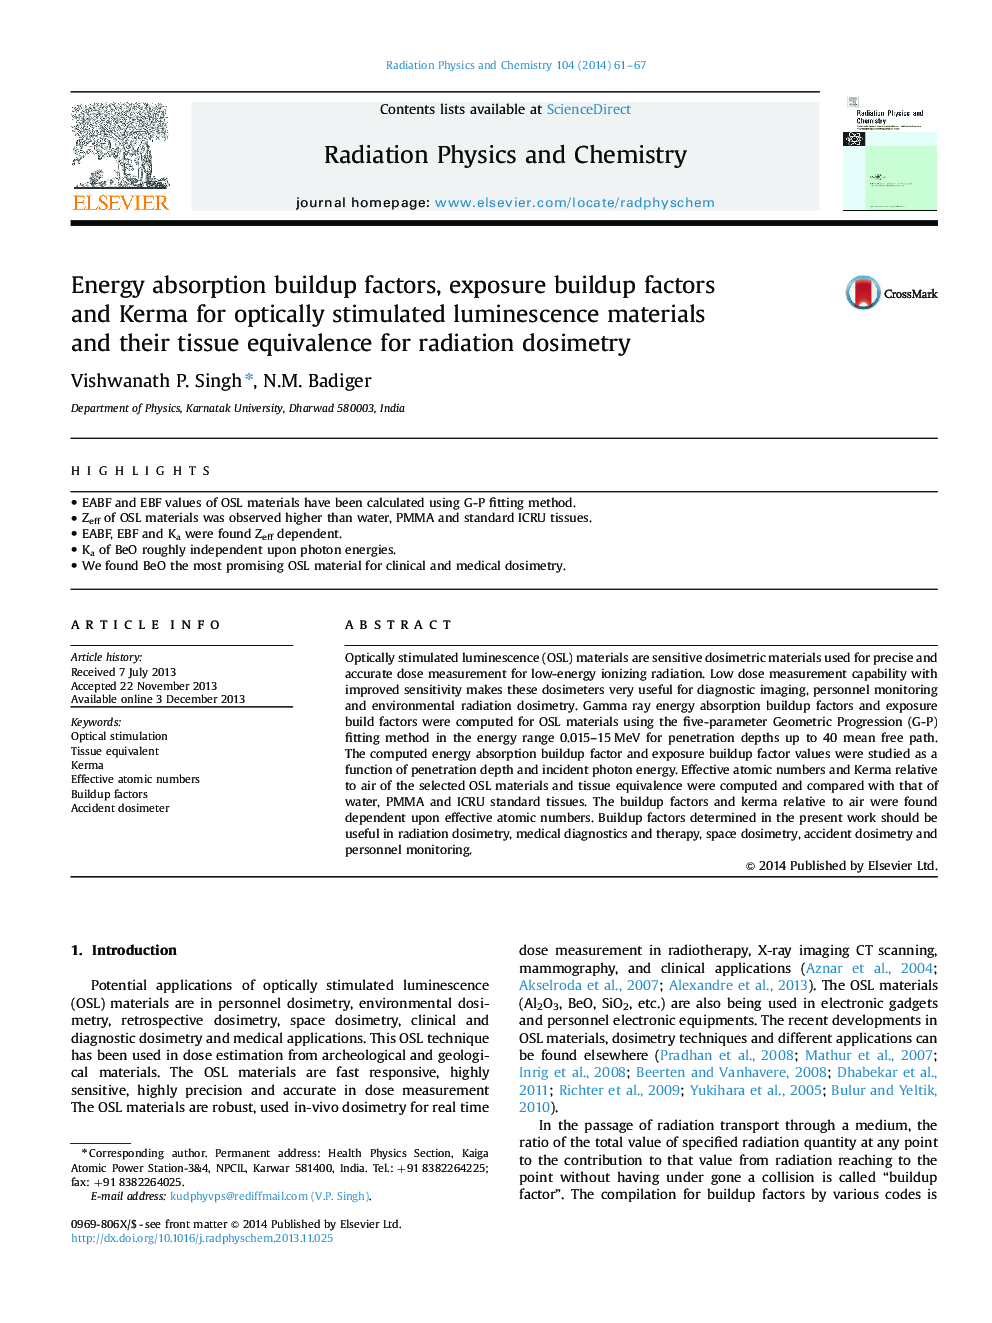 Energy absorption buildup factors, exposure buildup factors and Kerma for optically stimulated luminescence materials and their tissue equivalence for radiation dosimetry